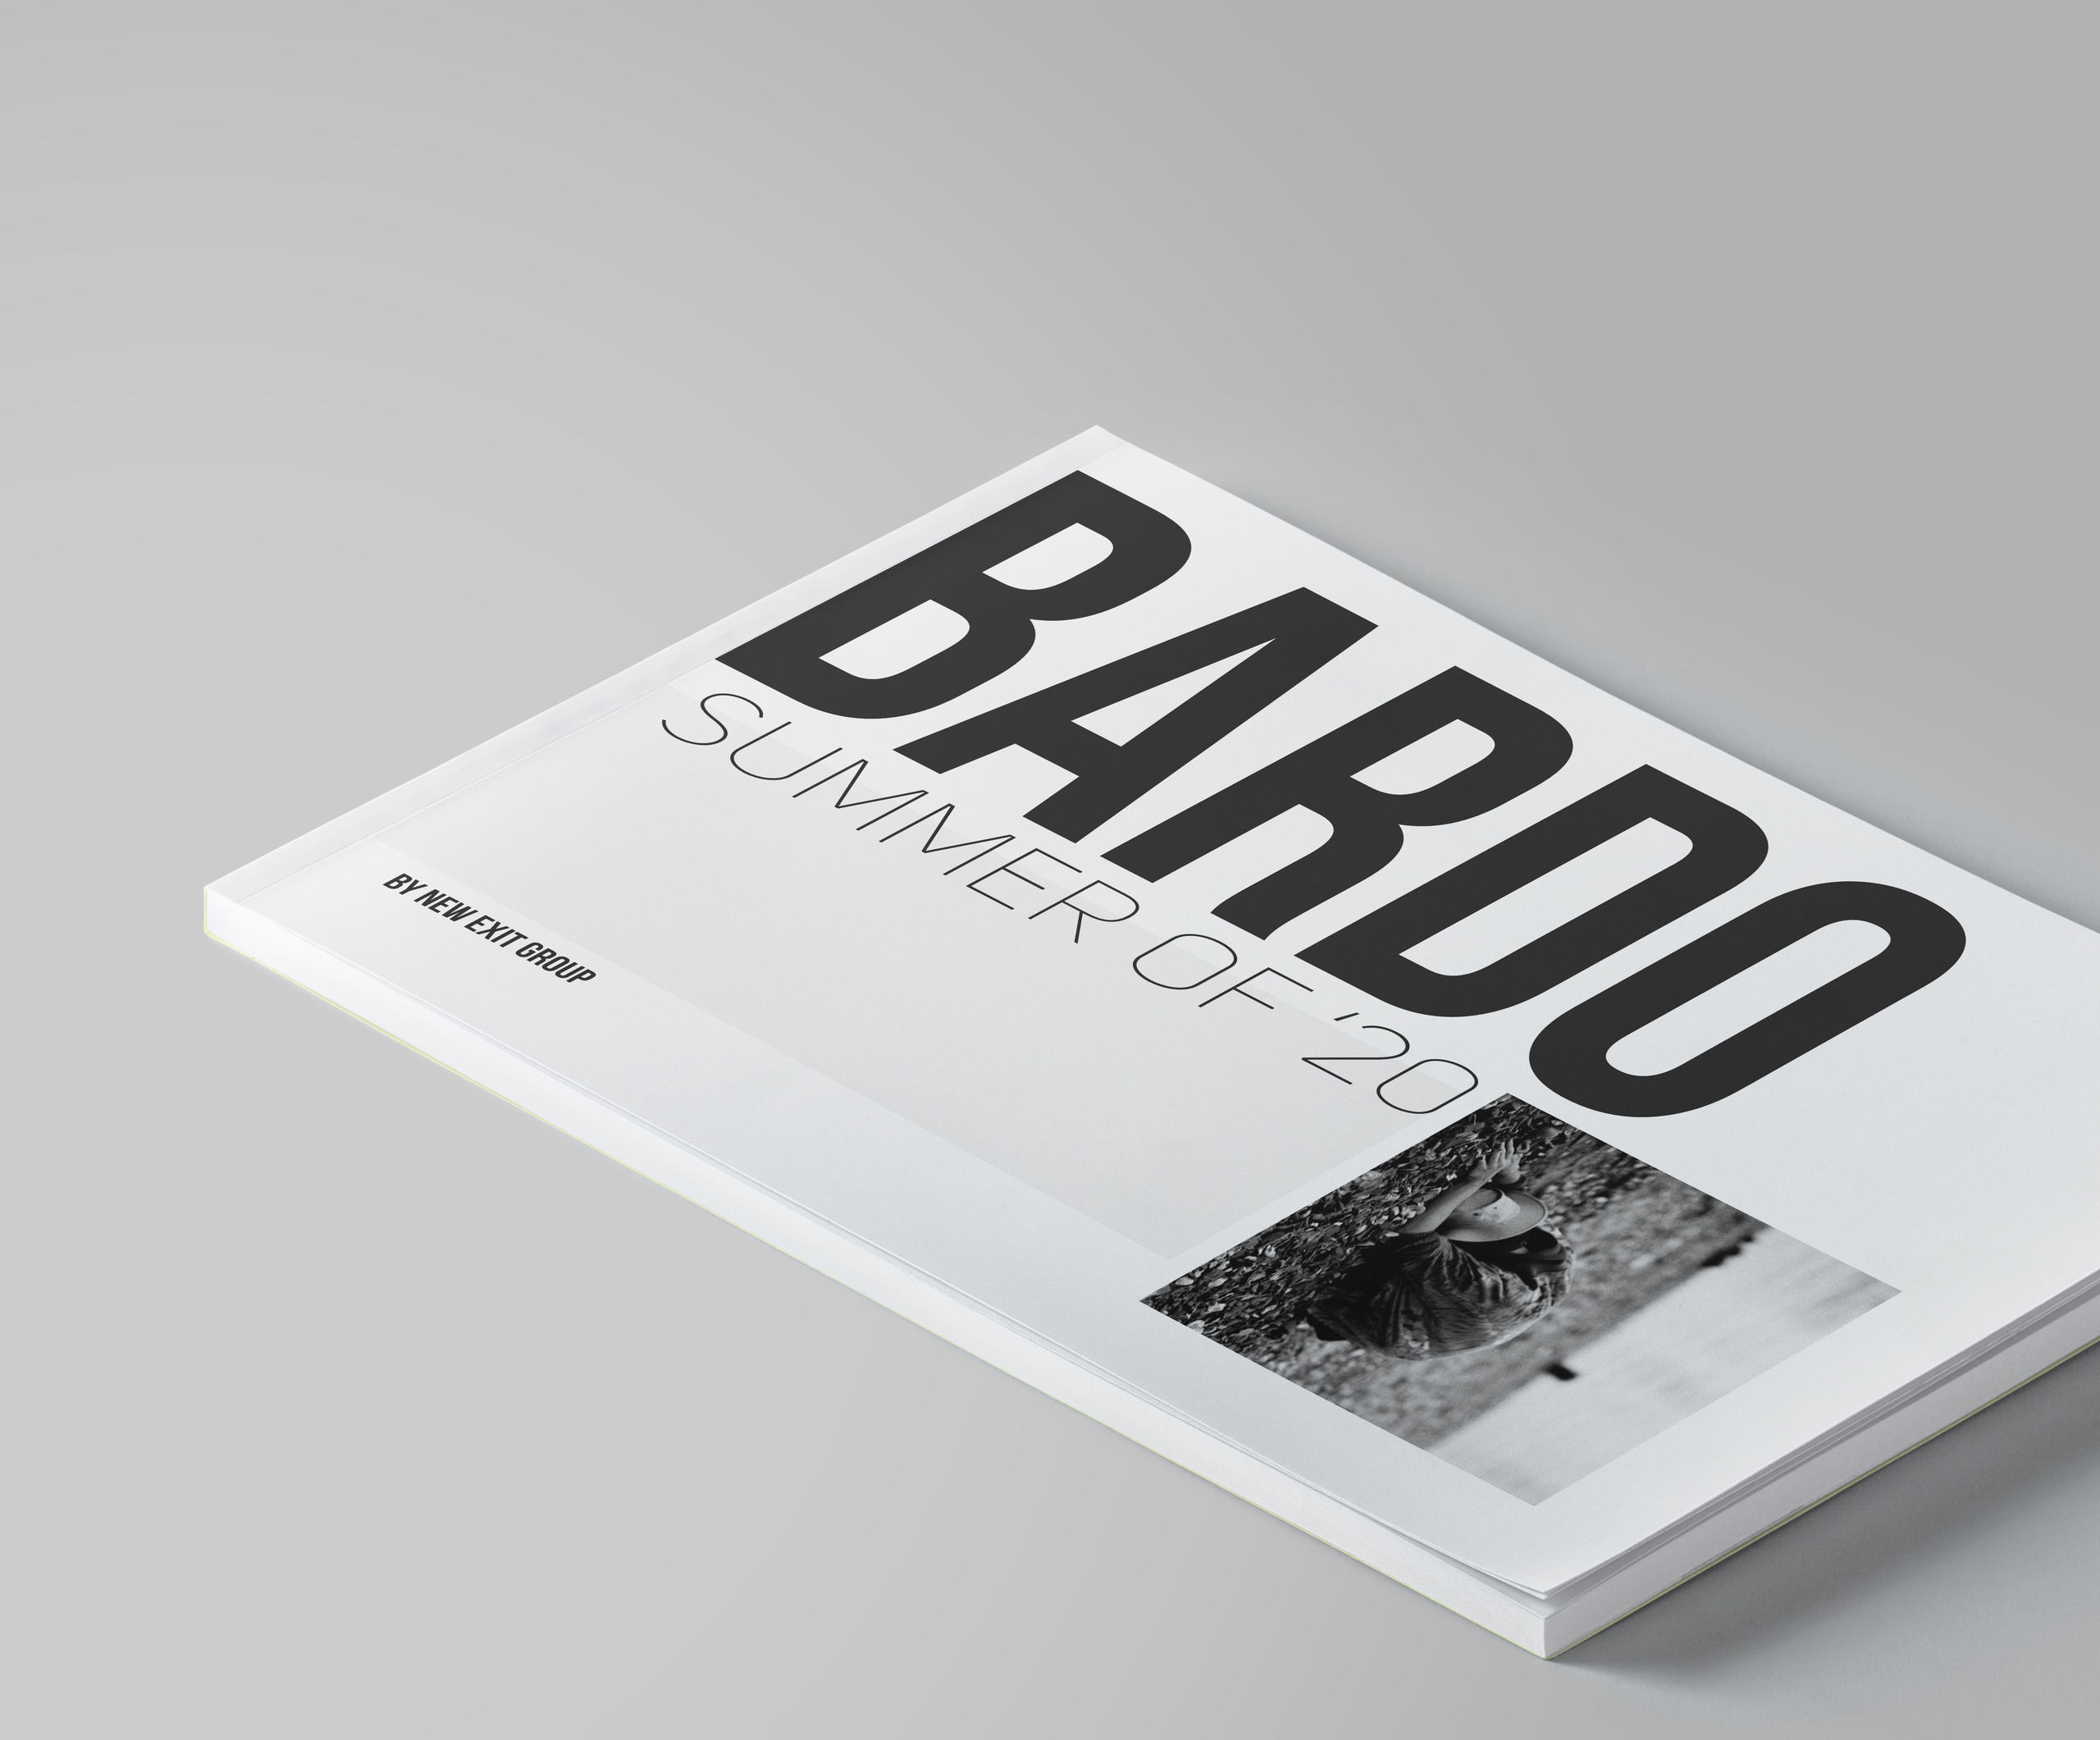 Producing BARDO: The Summer of ‘20 with Affinity Publisher by Simon King